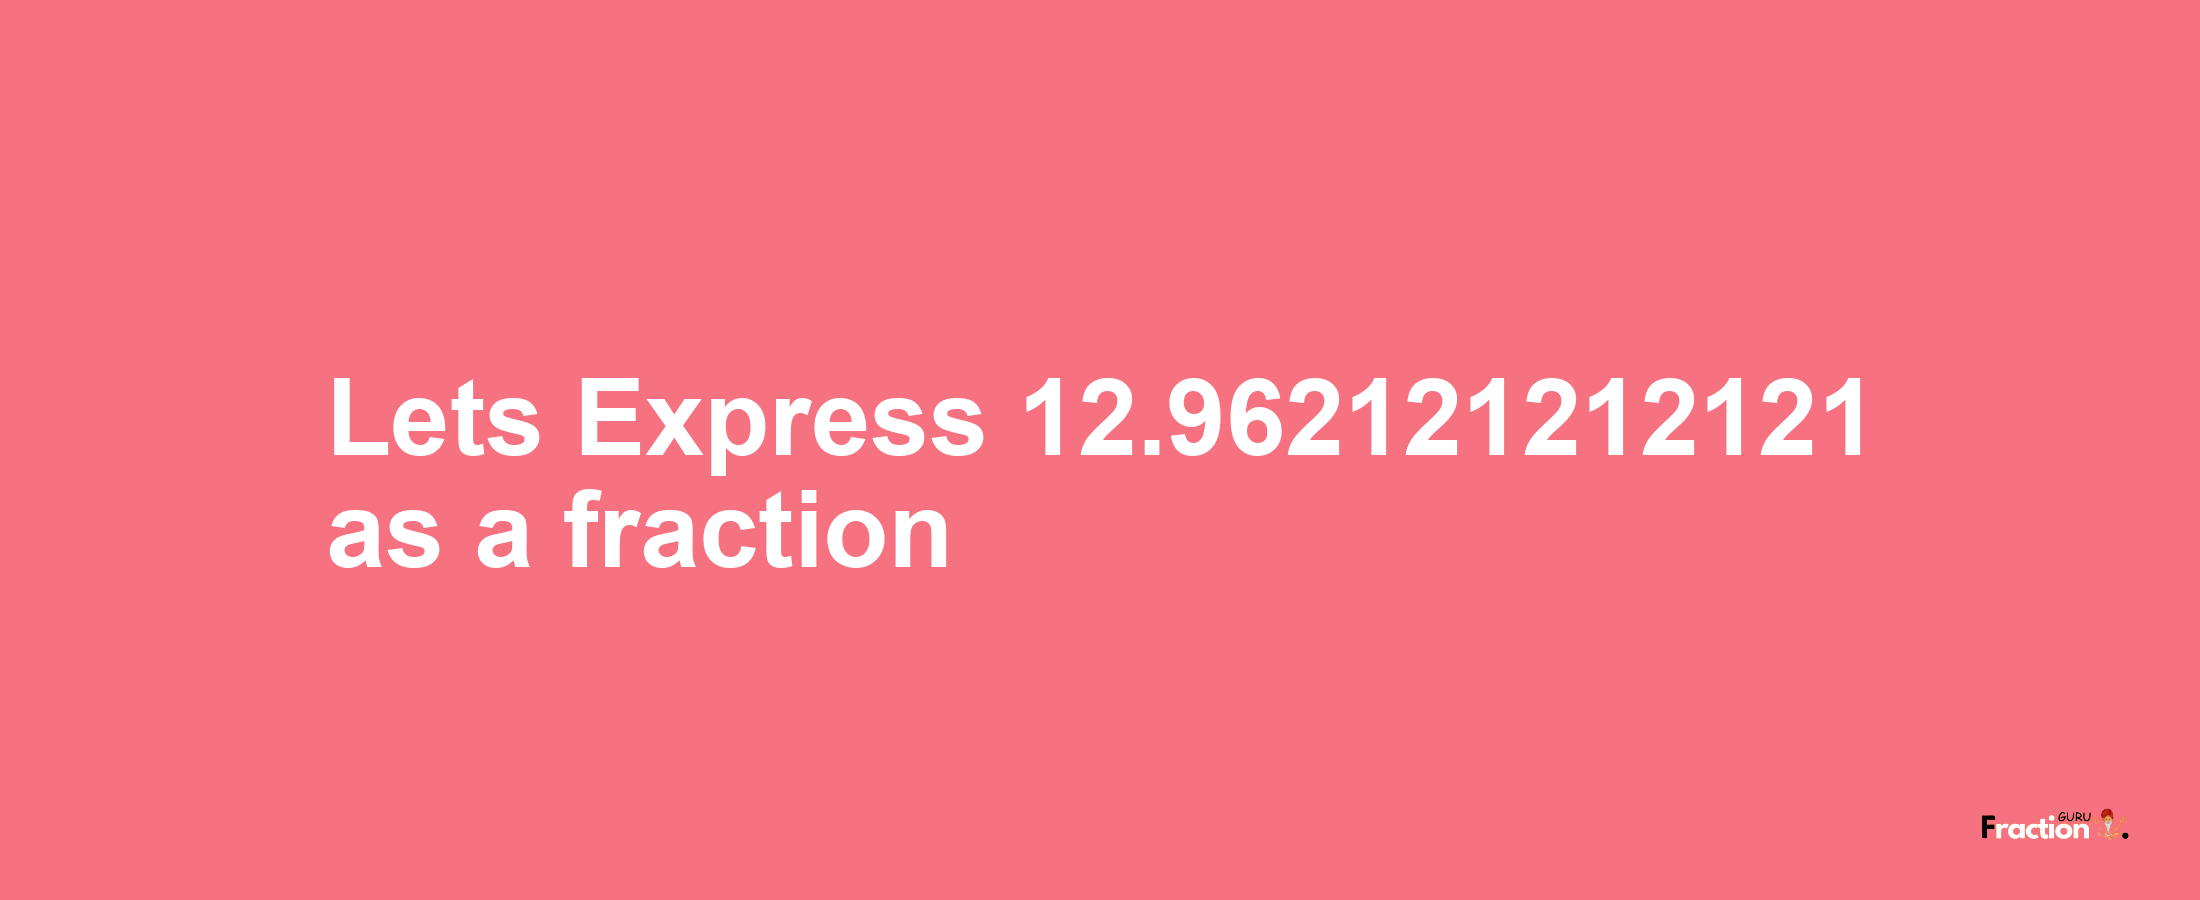 Lets Express 12.962121212121 as afraction